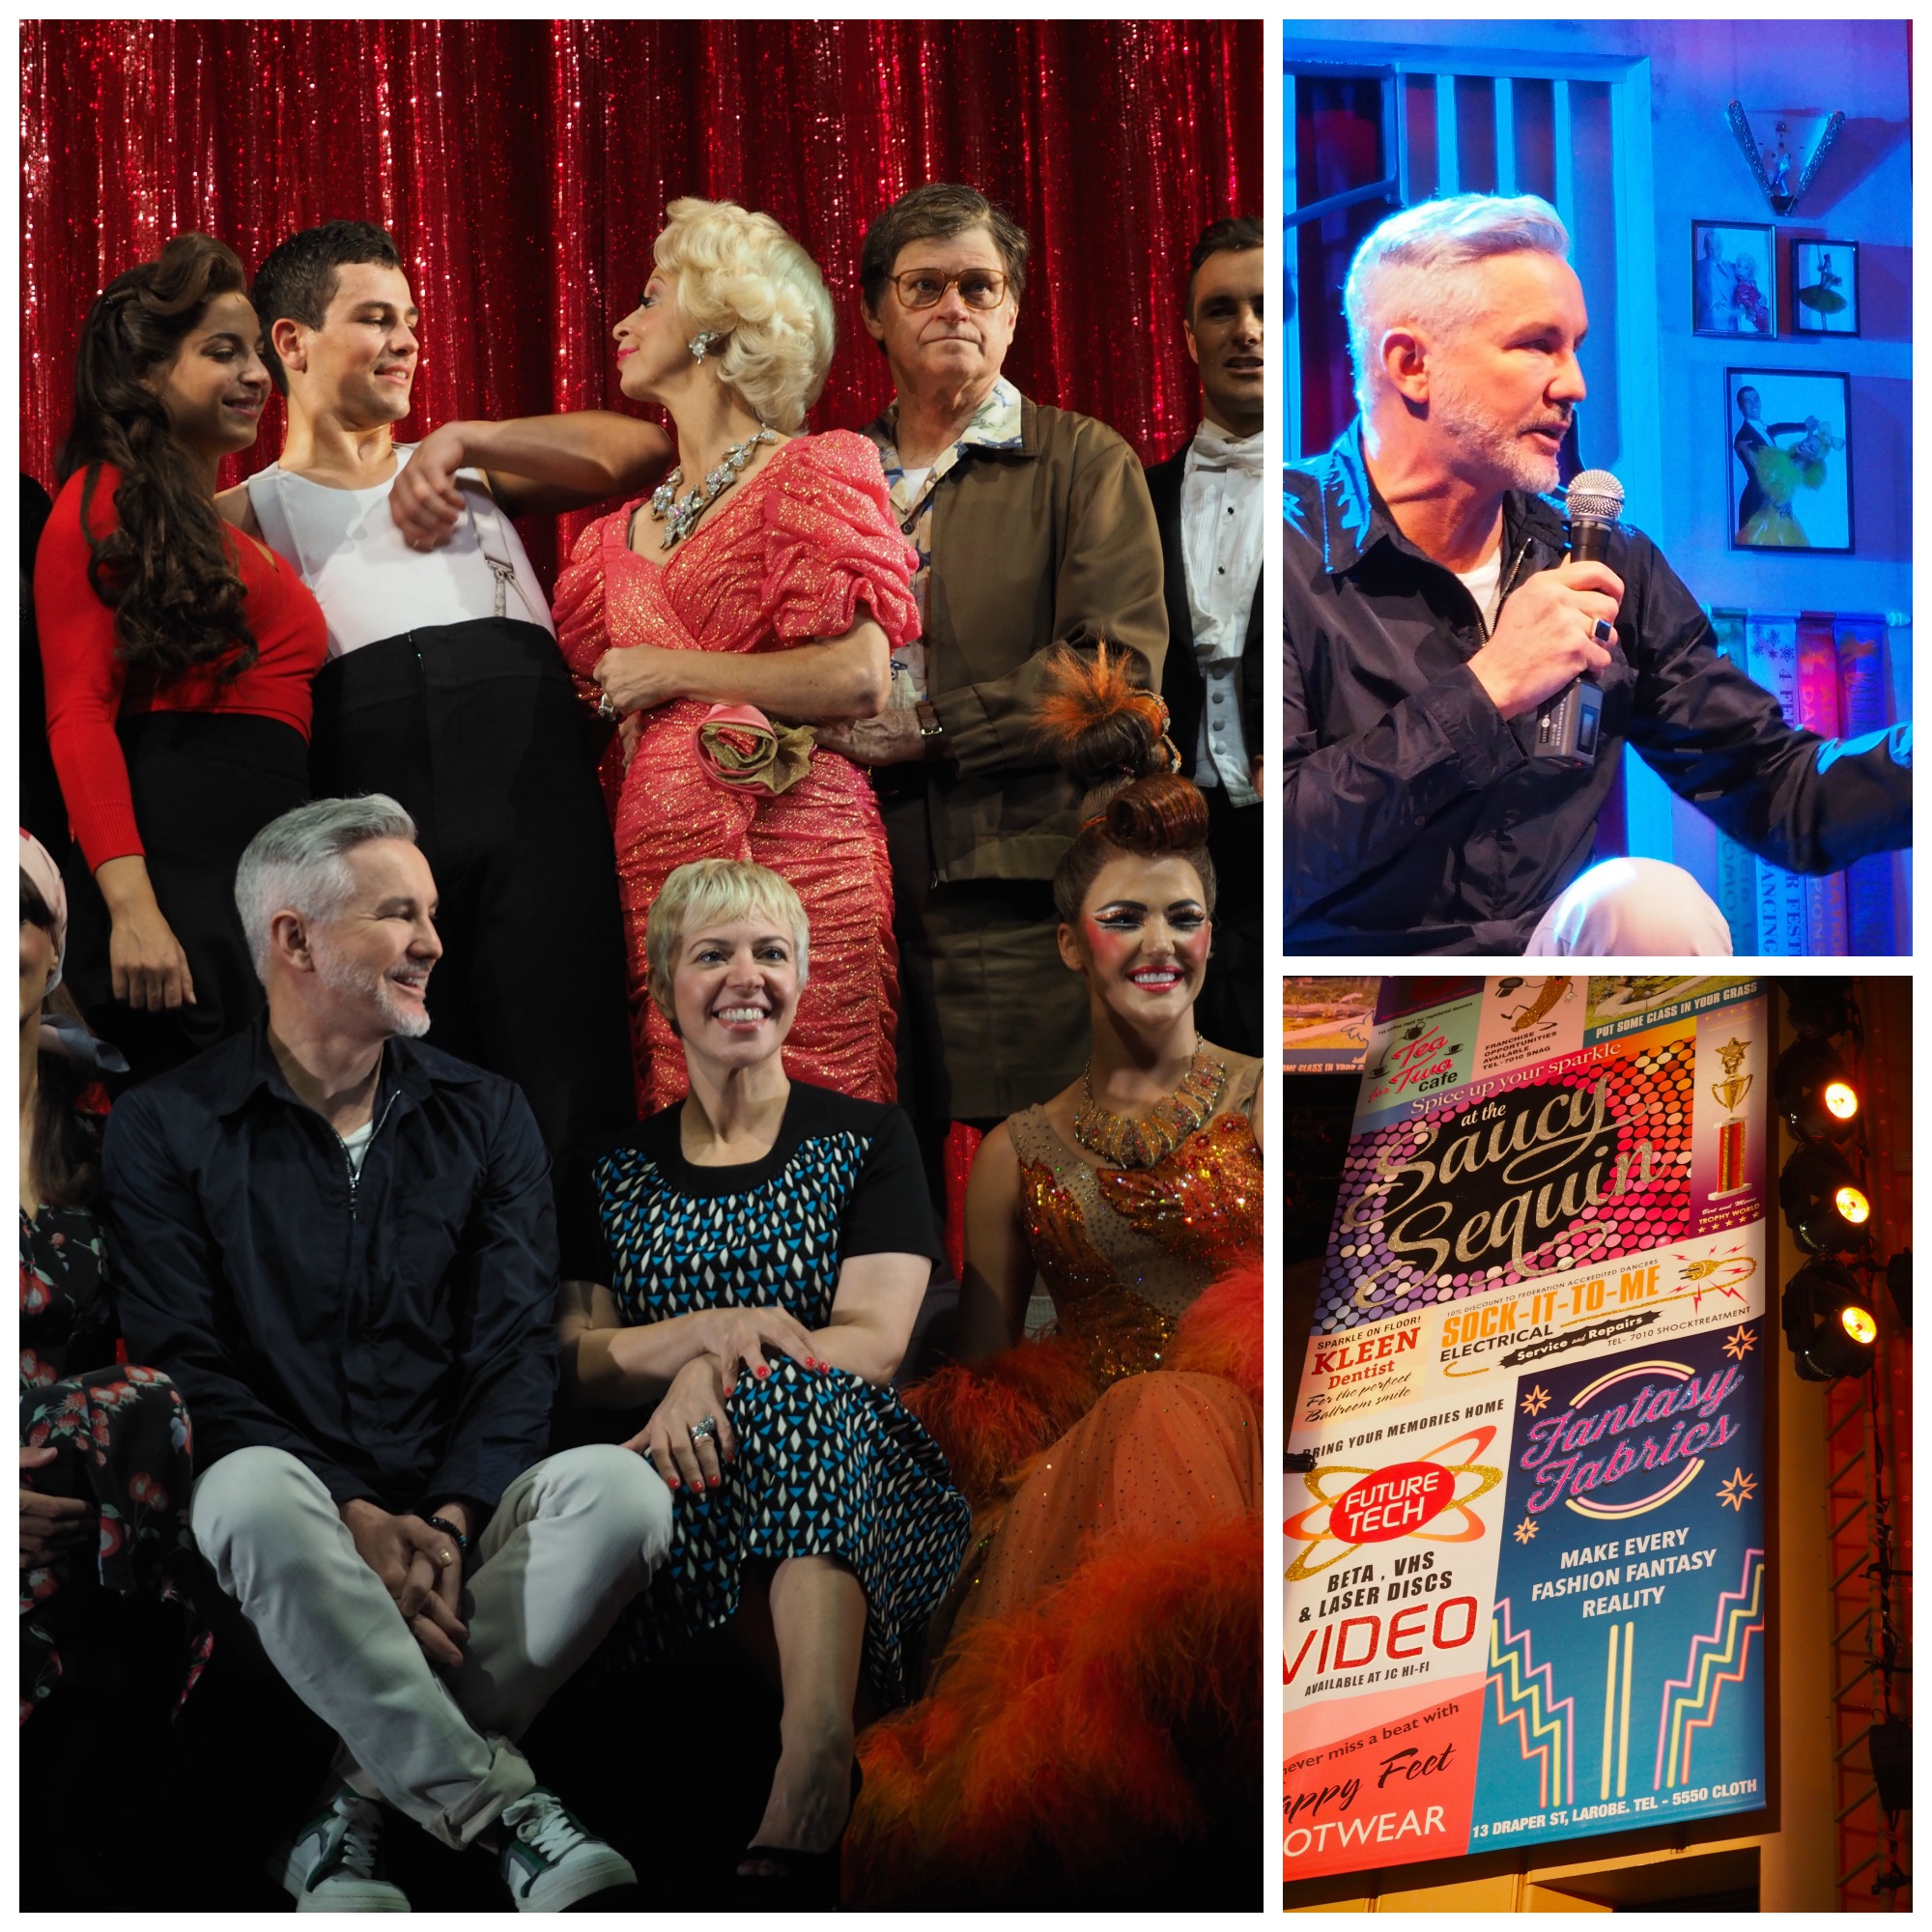 strictly ballroomcast collage